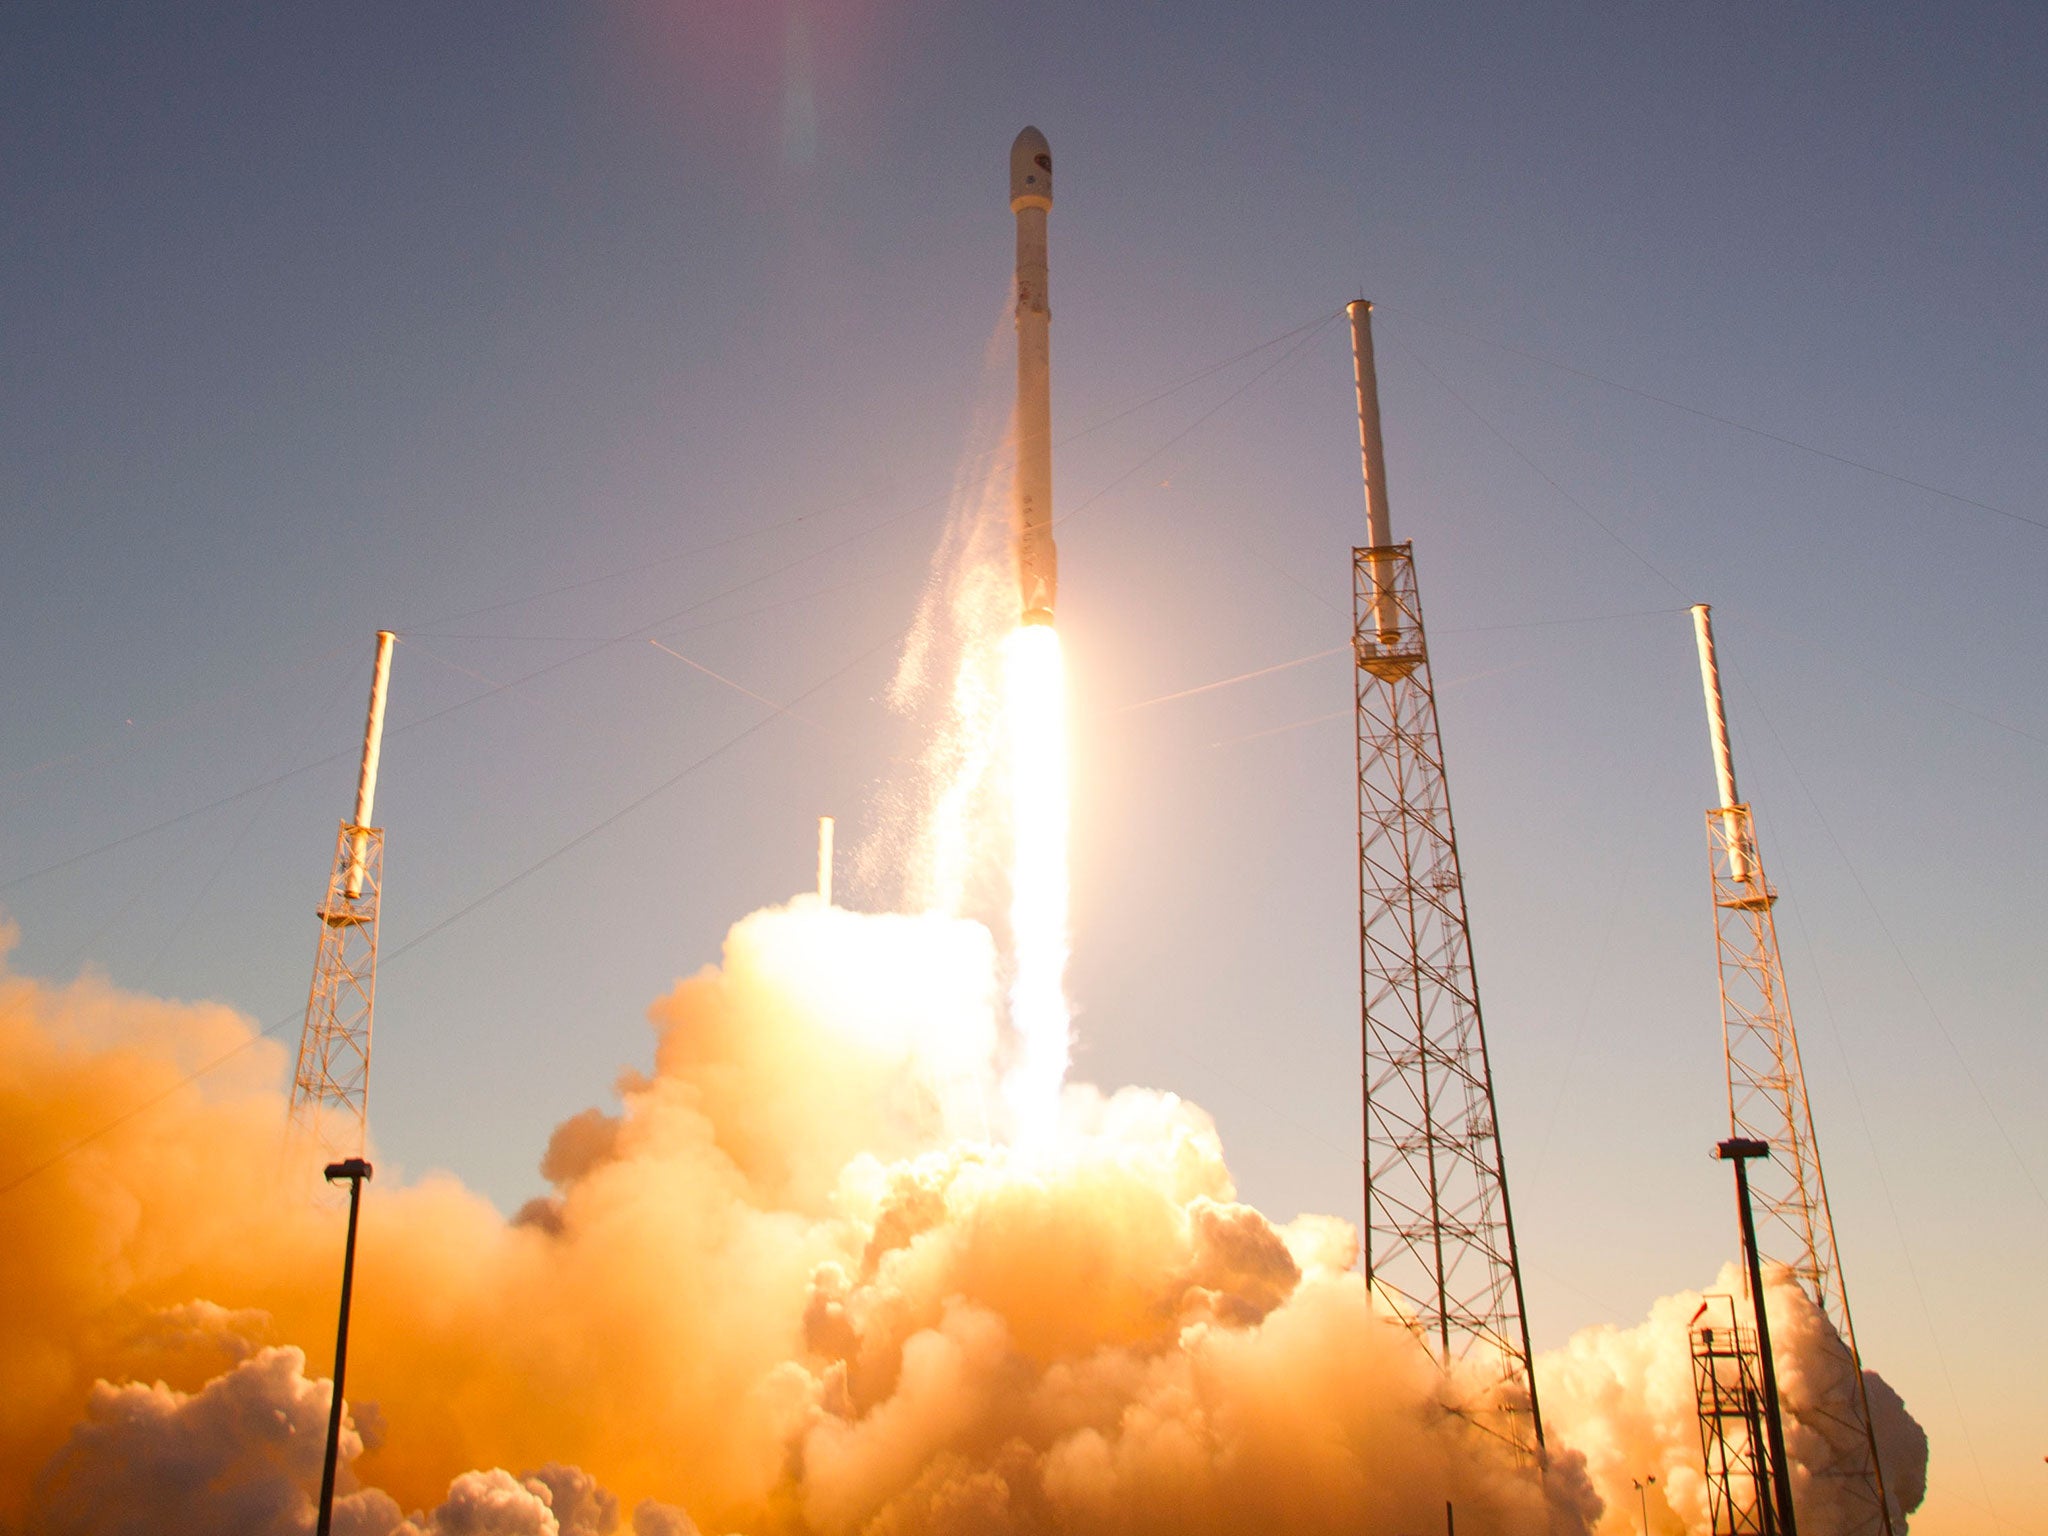 The unmanned Falcon 9 rocket, launched by SpaceX and carrying NOAA's Deep Space Climate Observatory Satellite, lifts off from launch pad 40 the Cape Canaveral Air Force Station in Cape Canaveral, Florida. The rocket blasted off to put the U.S. satellite i